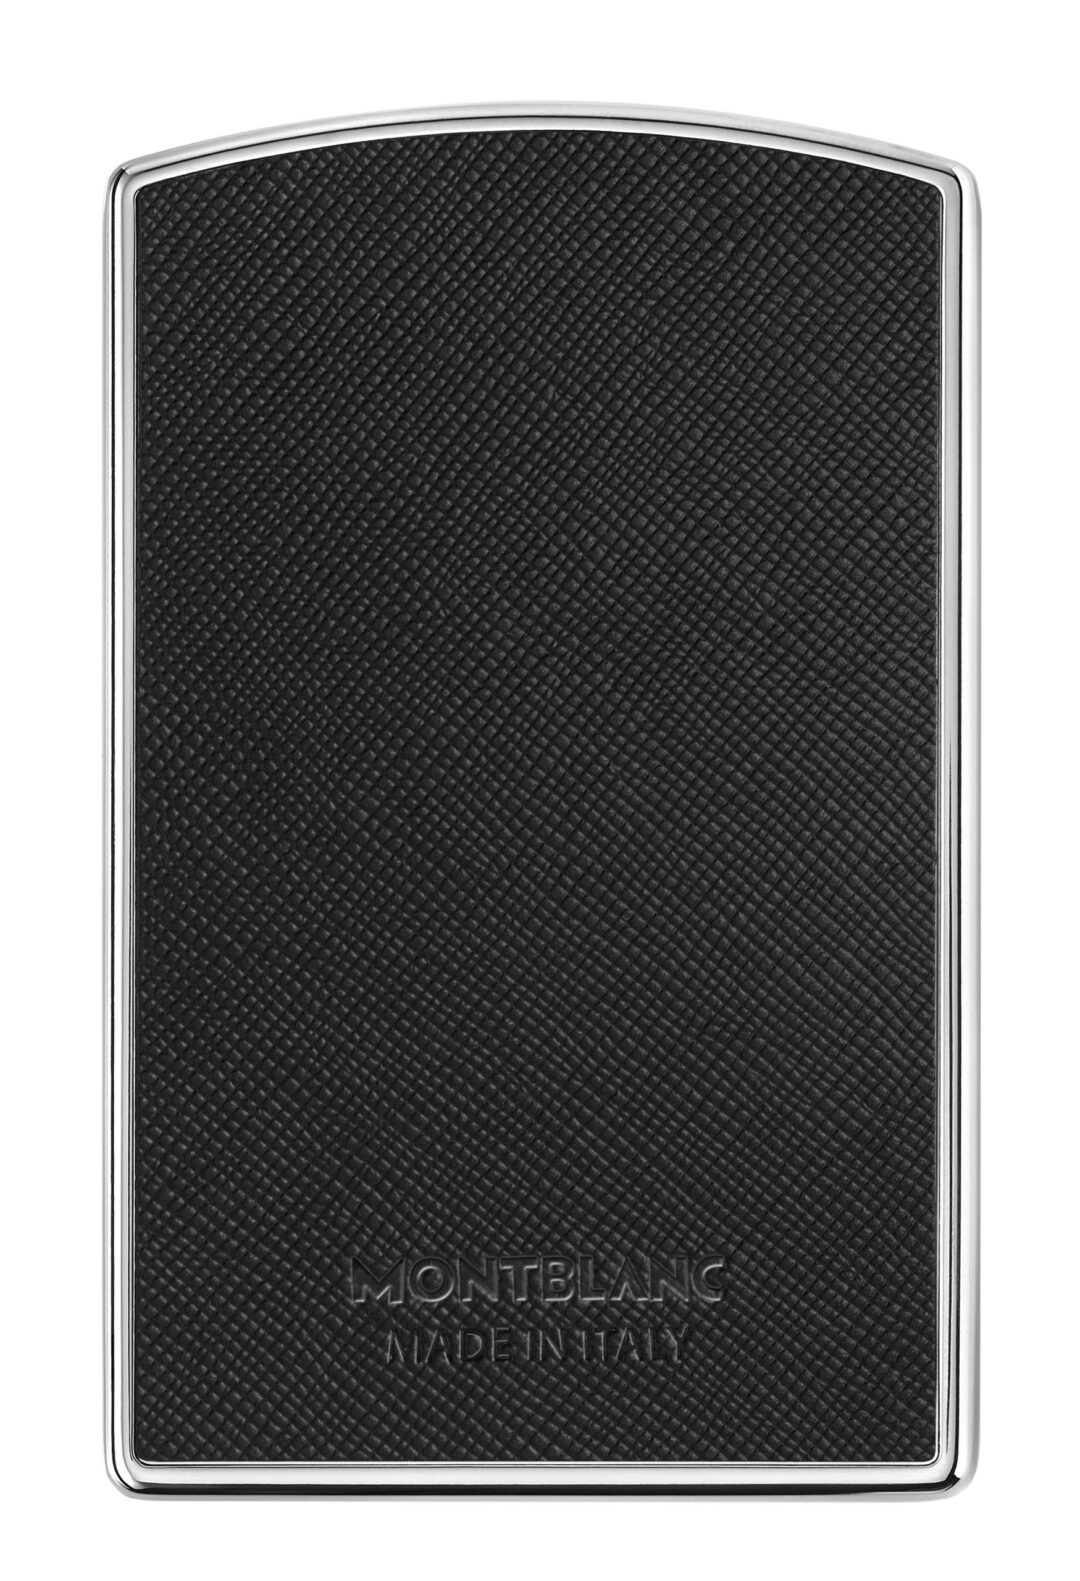 Montblanc Sartorial Hard Shell Business Card Holder / Black Jewels in Paradise Aruba 116390